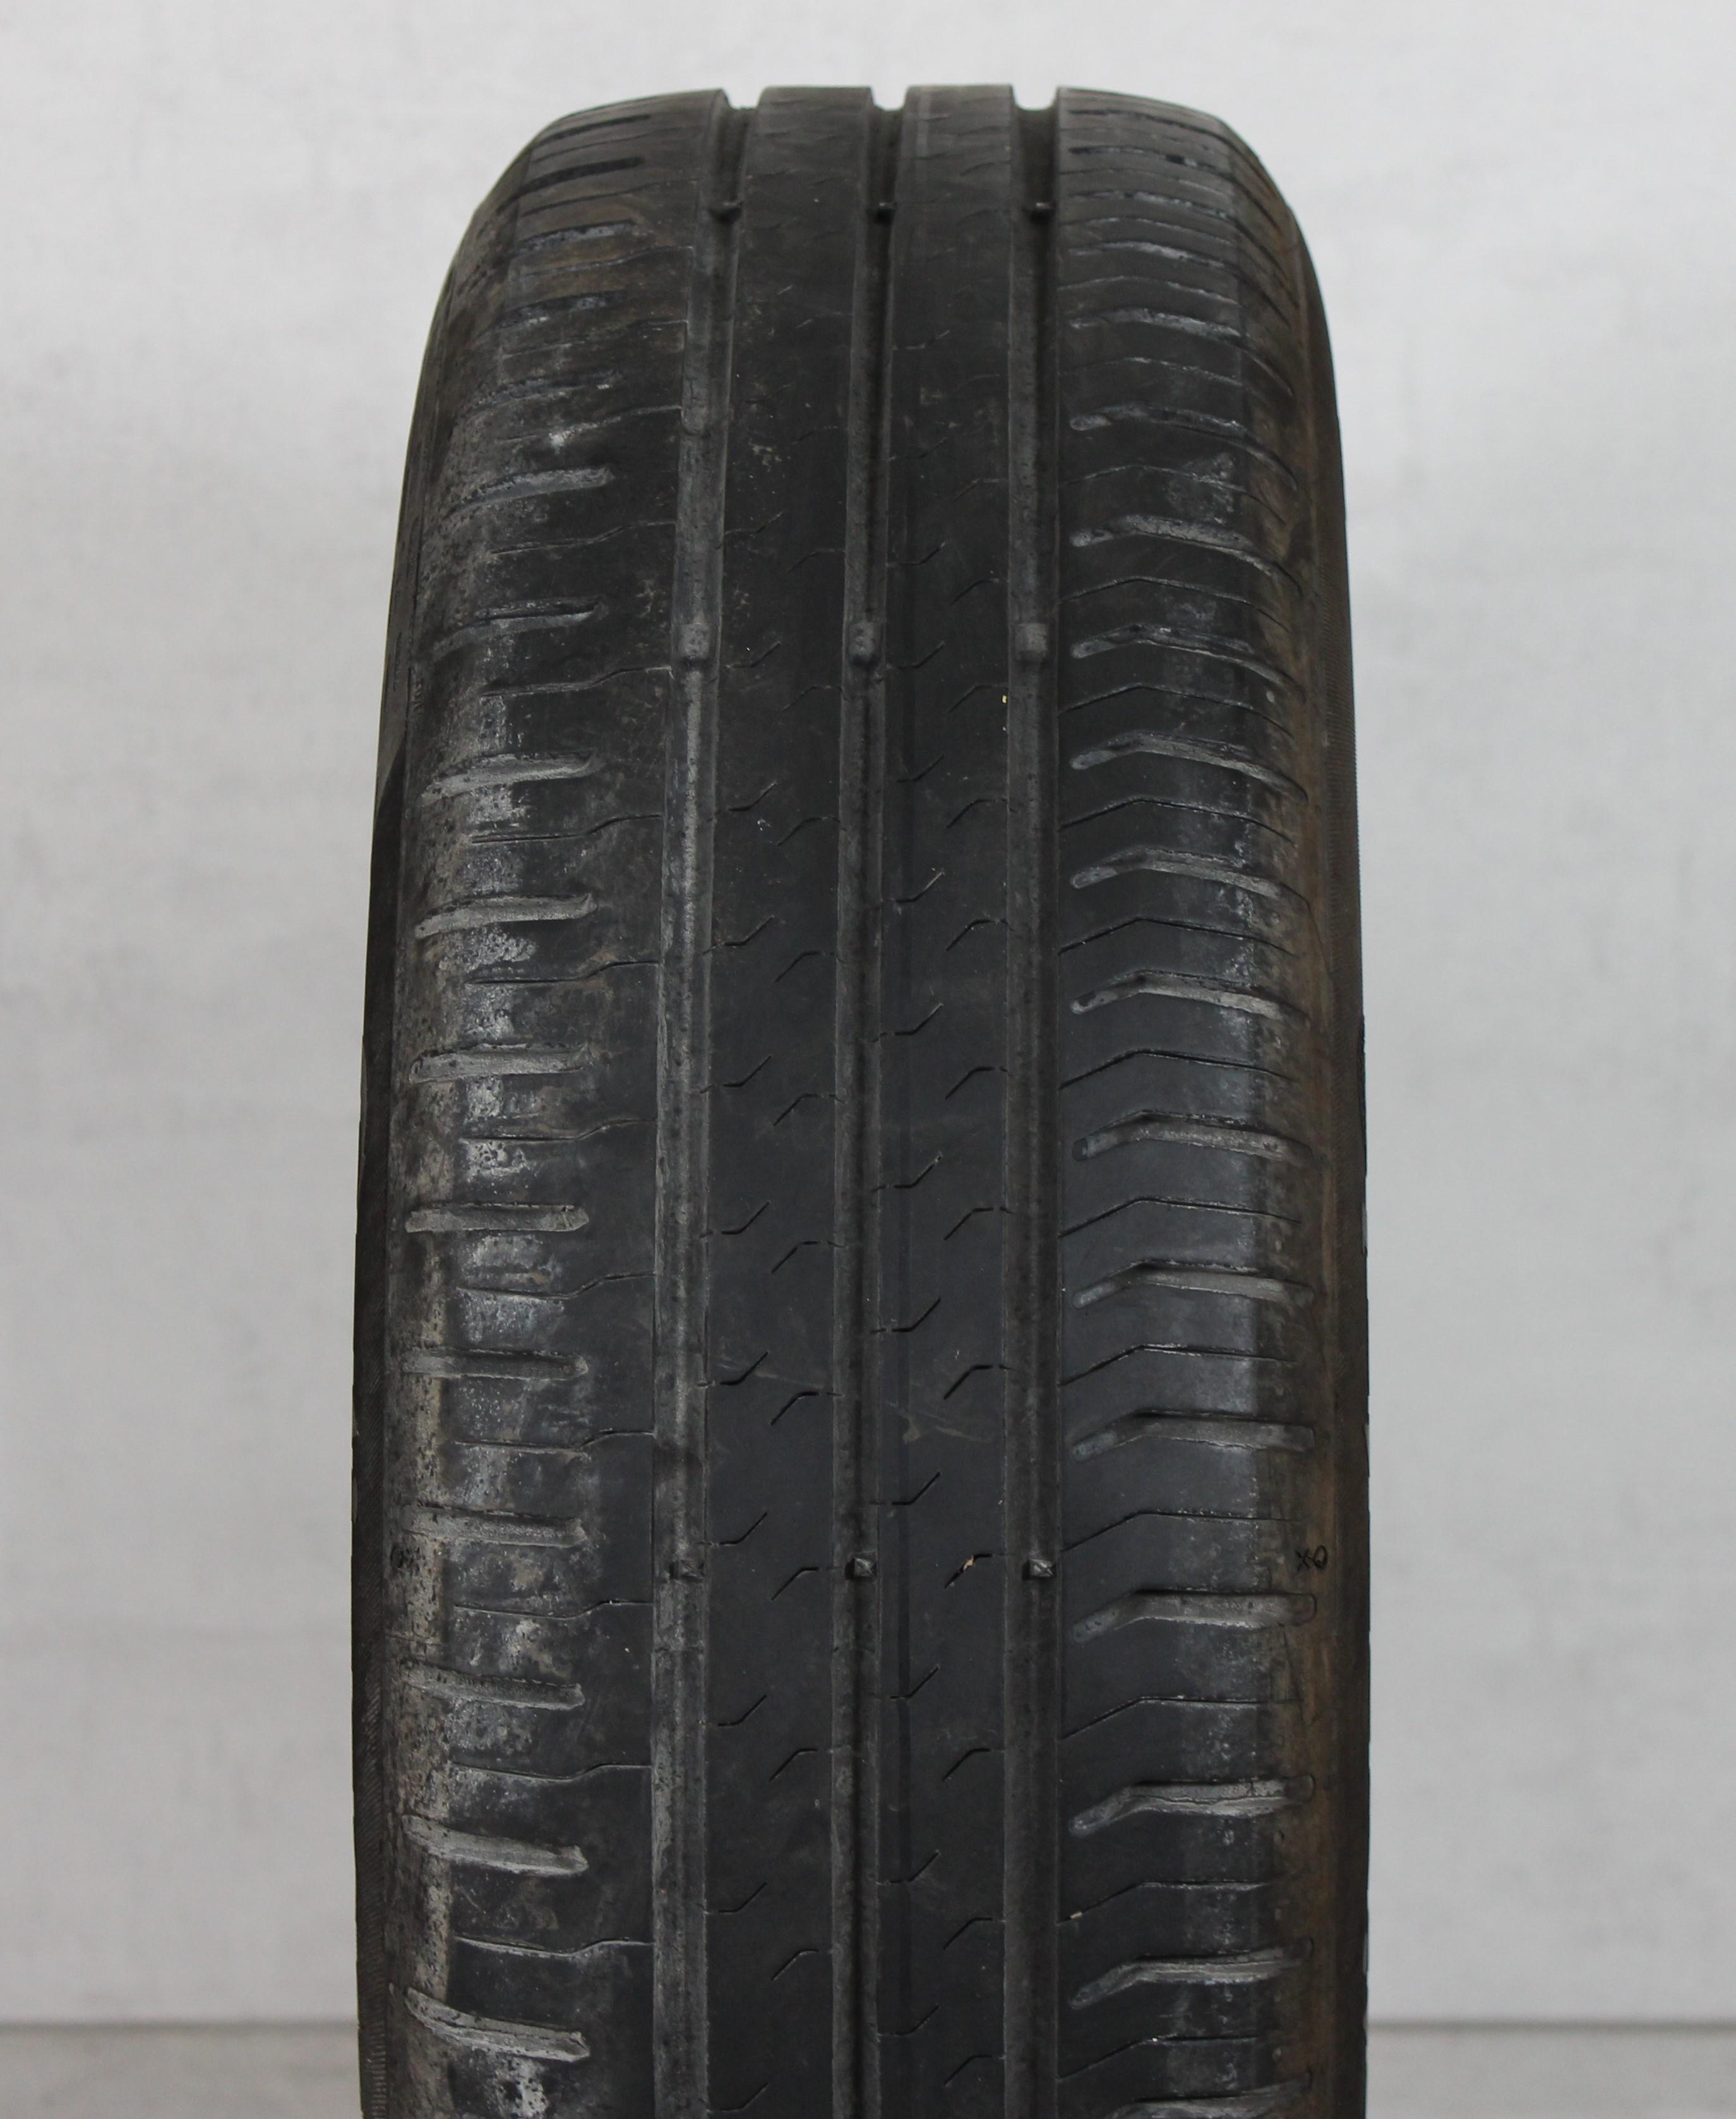 1 x 185/65R15 88T Sommerreifen Continental Eco Contact 5 5mm 2015